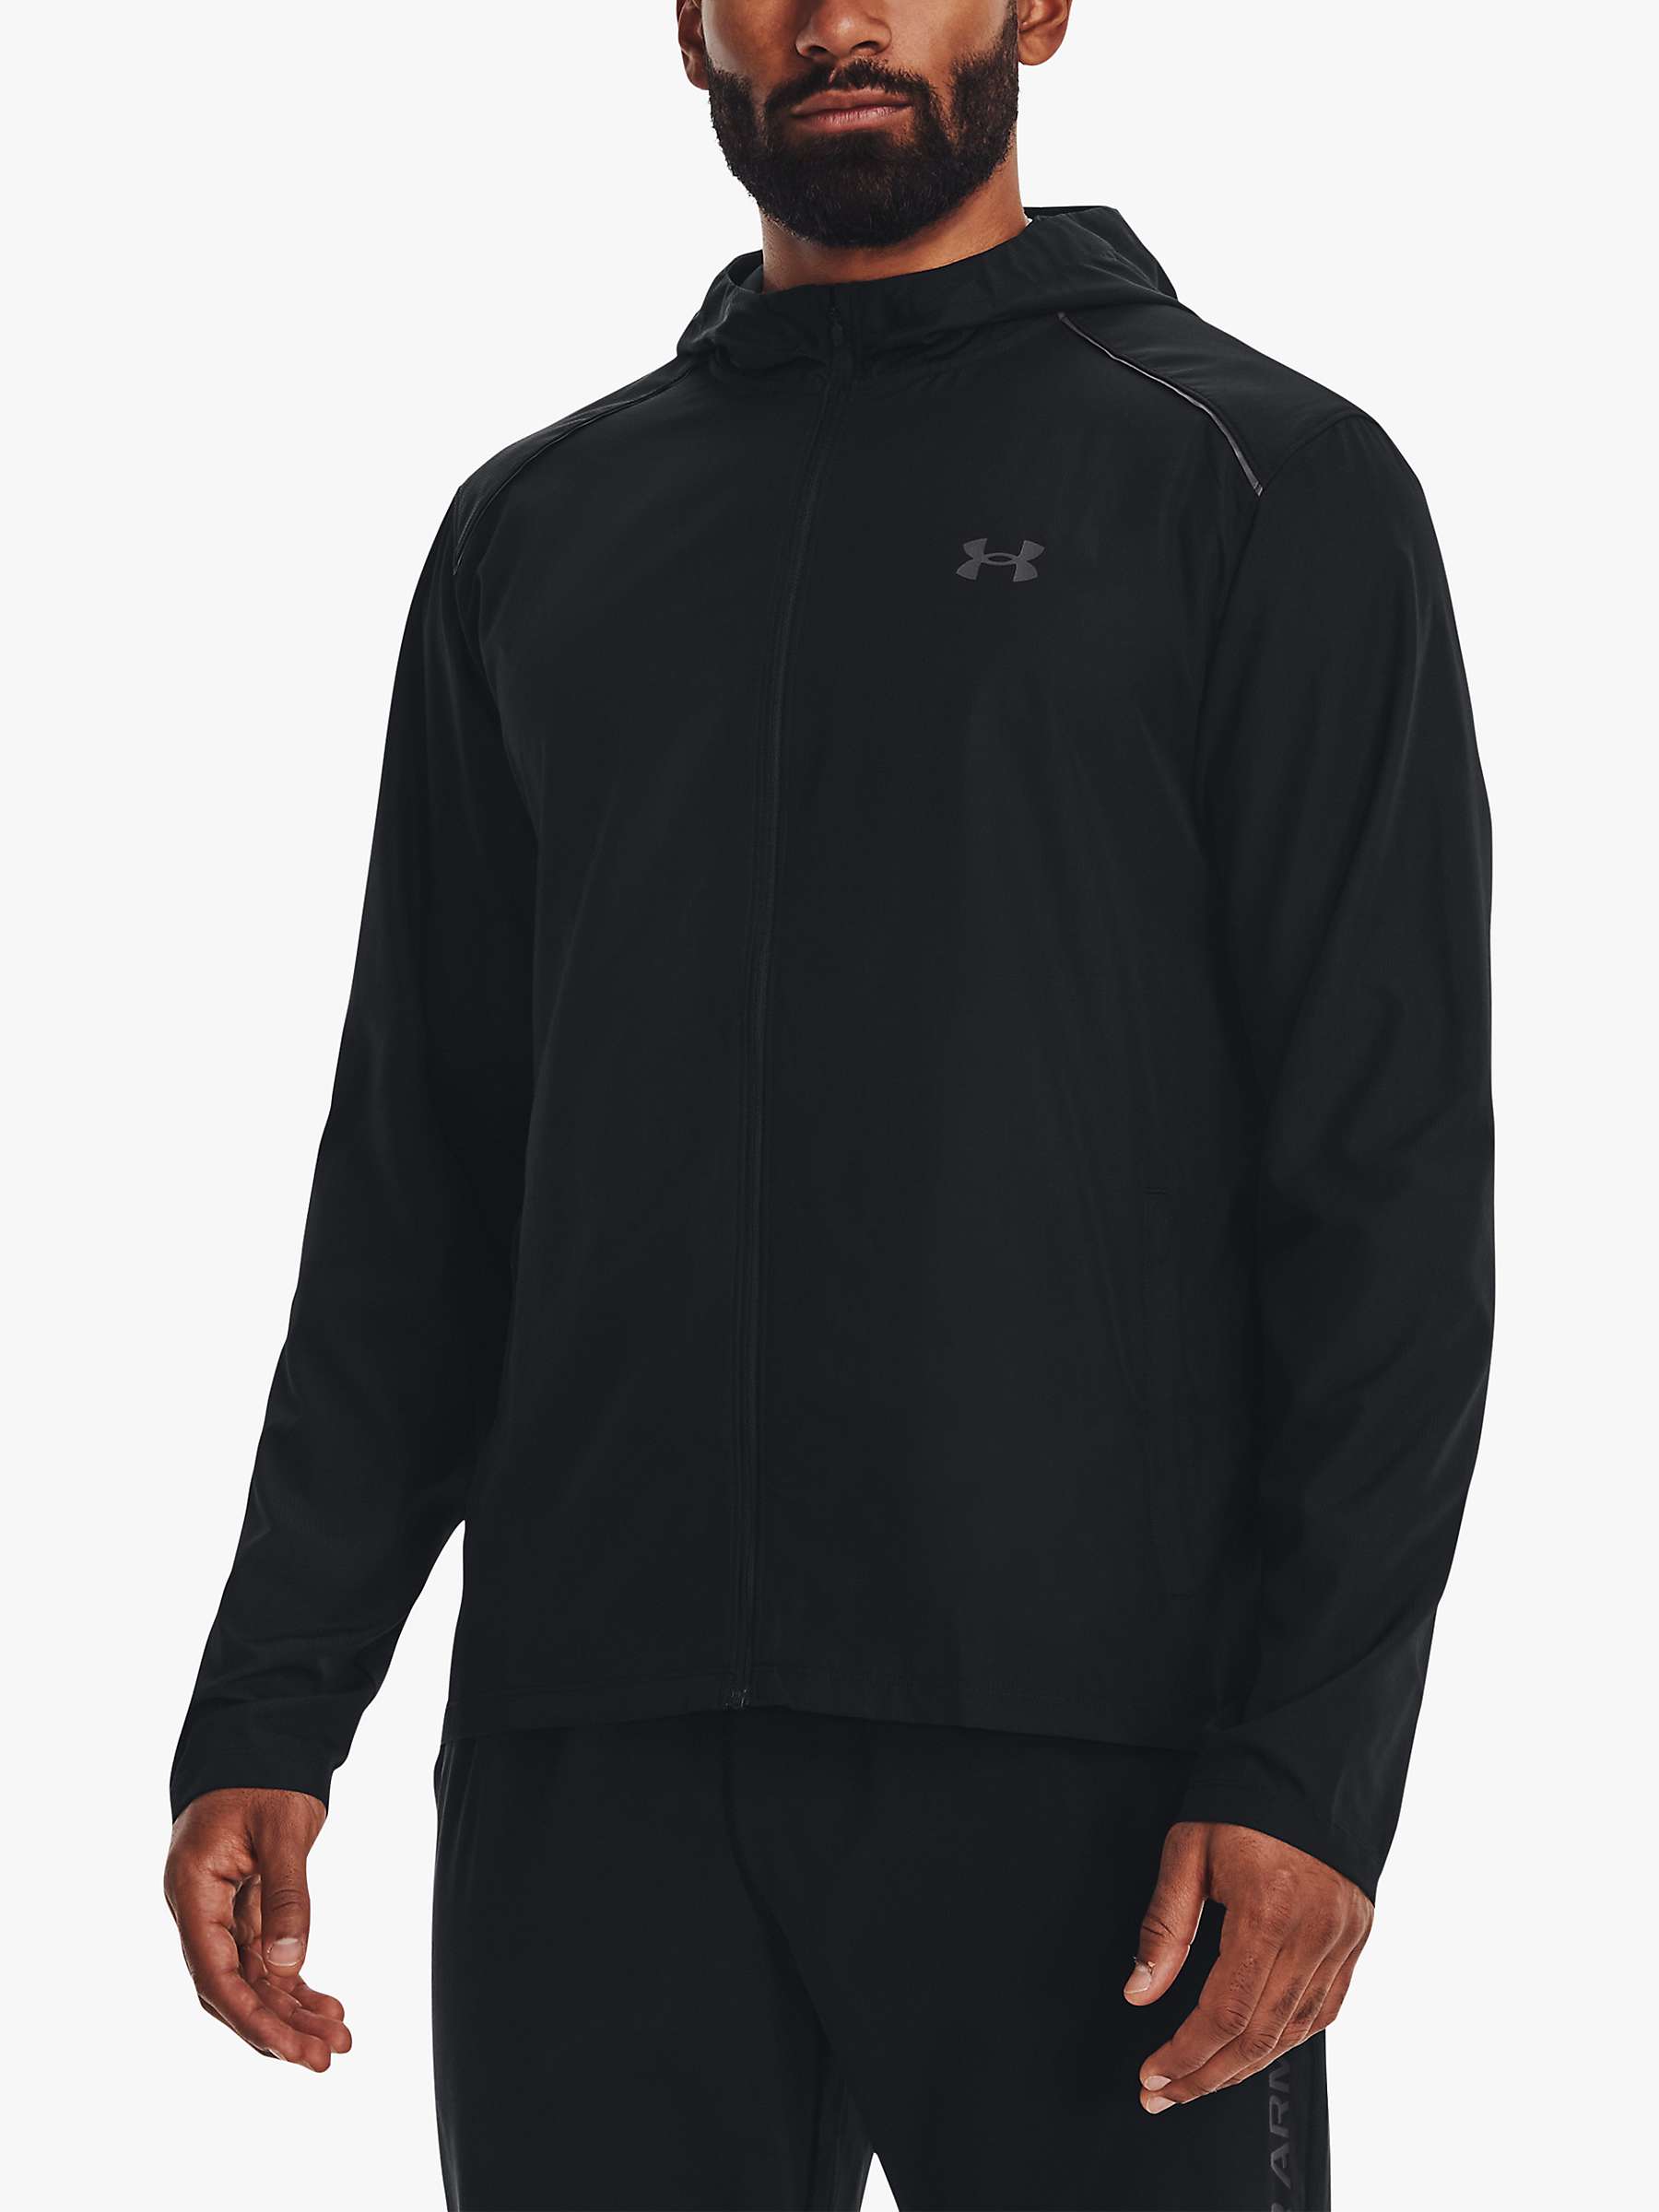 Buy Under Armour Run Anywhere Storm Men's Running Jacket Online at johnlewis.com